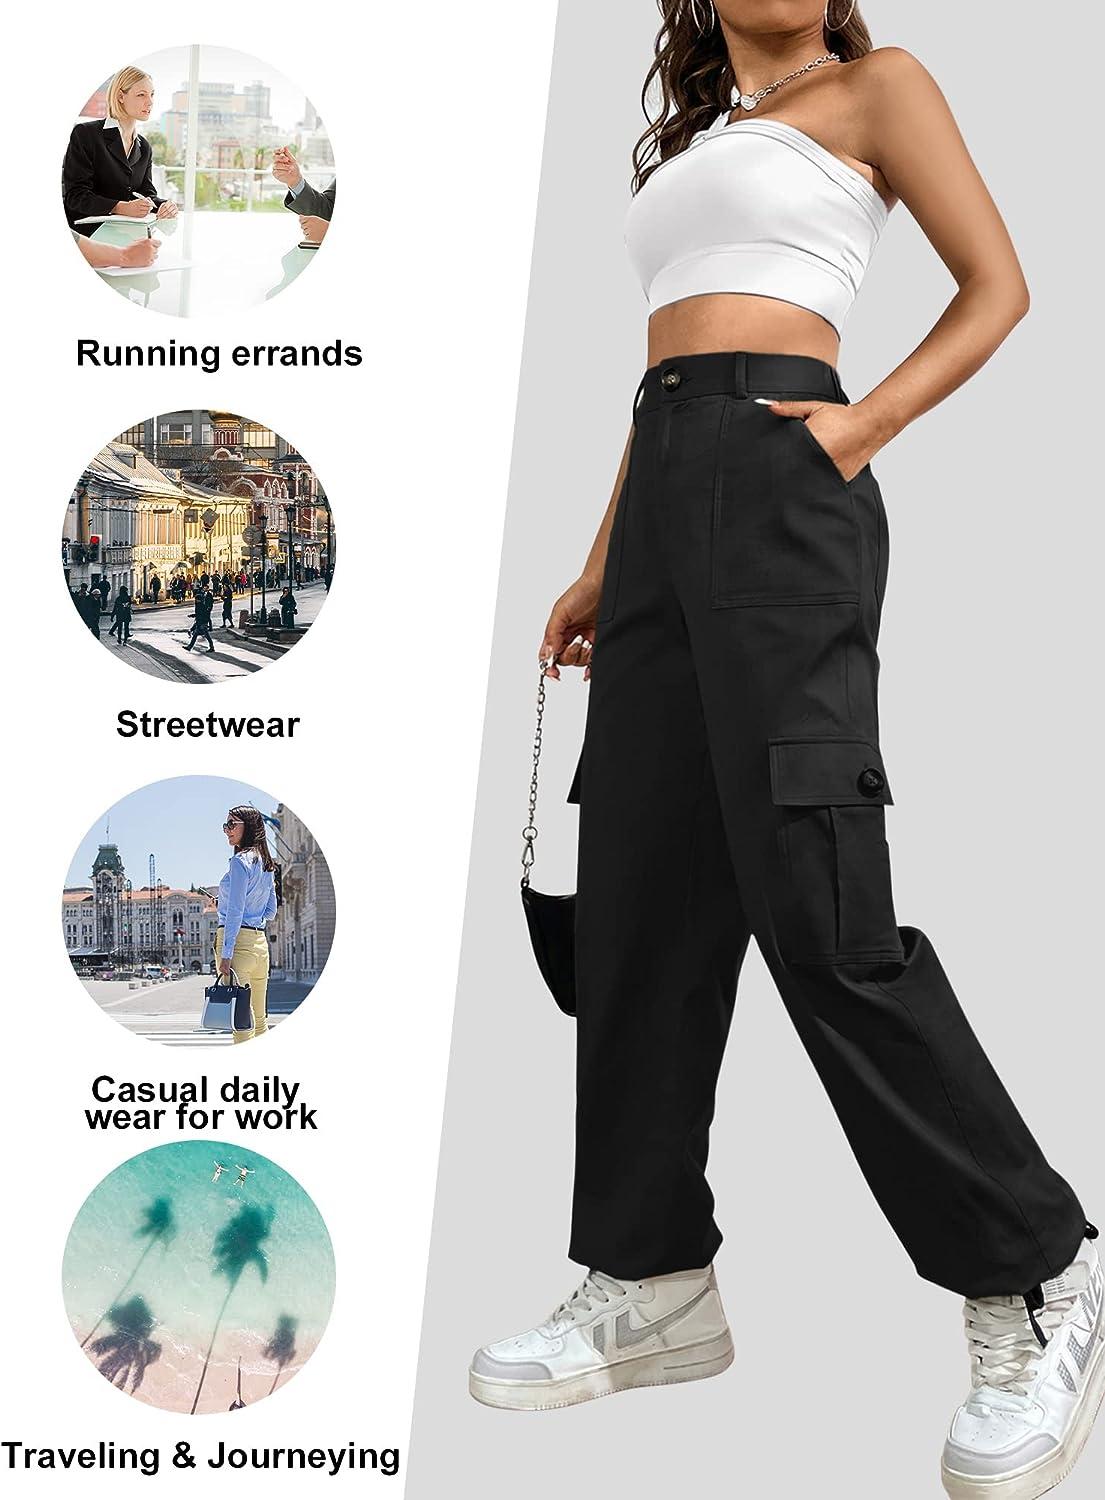 LOLOCCI Cargo Pants for Women High Waisted Travel Tactical Streetwear Casual  Pants with 6 Pockets Drawstring Ankle Cuffs Black Medium